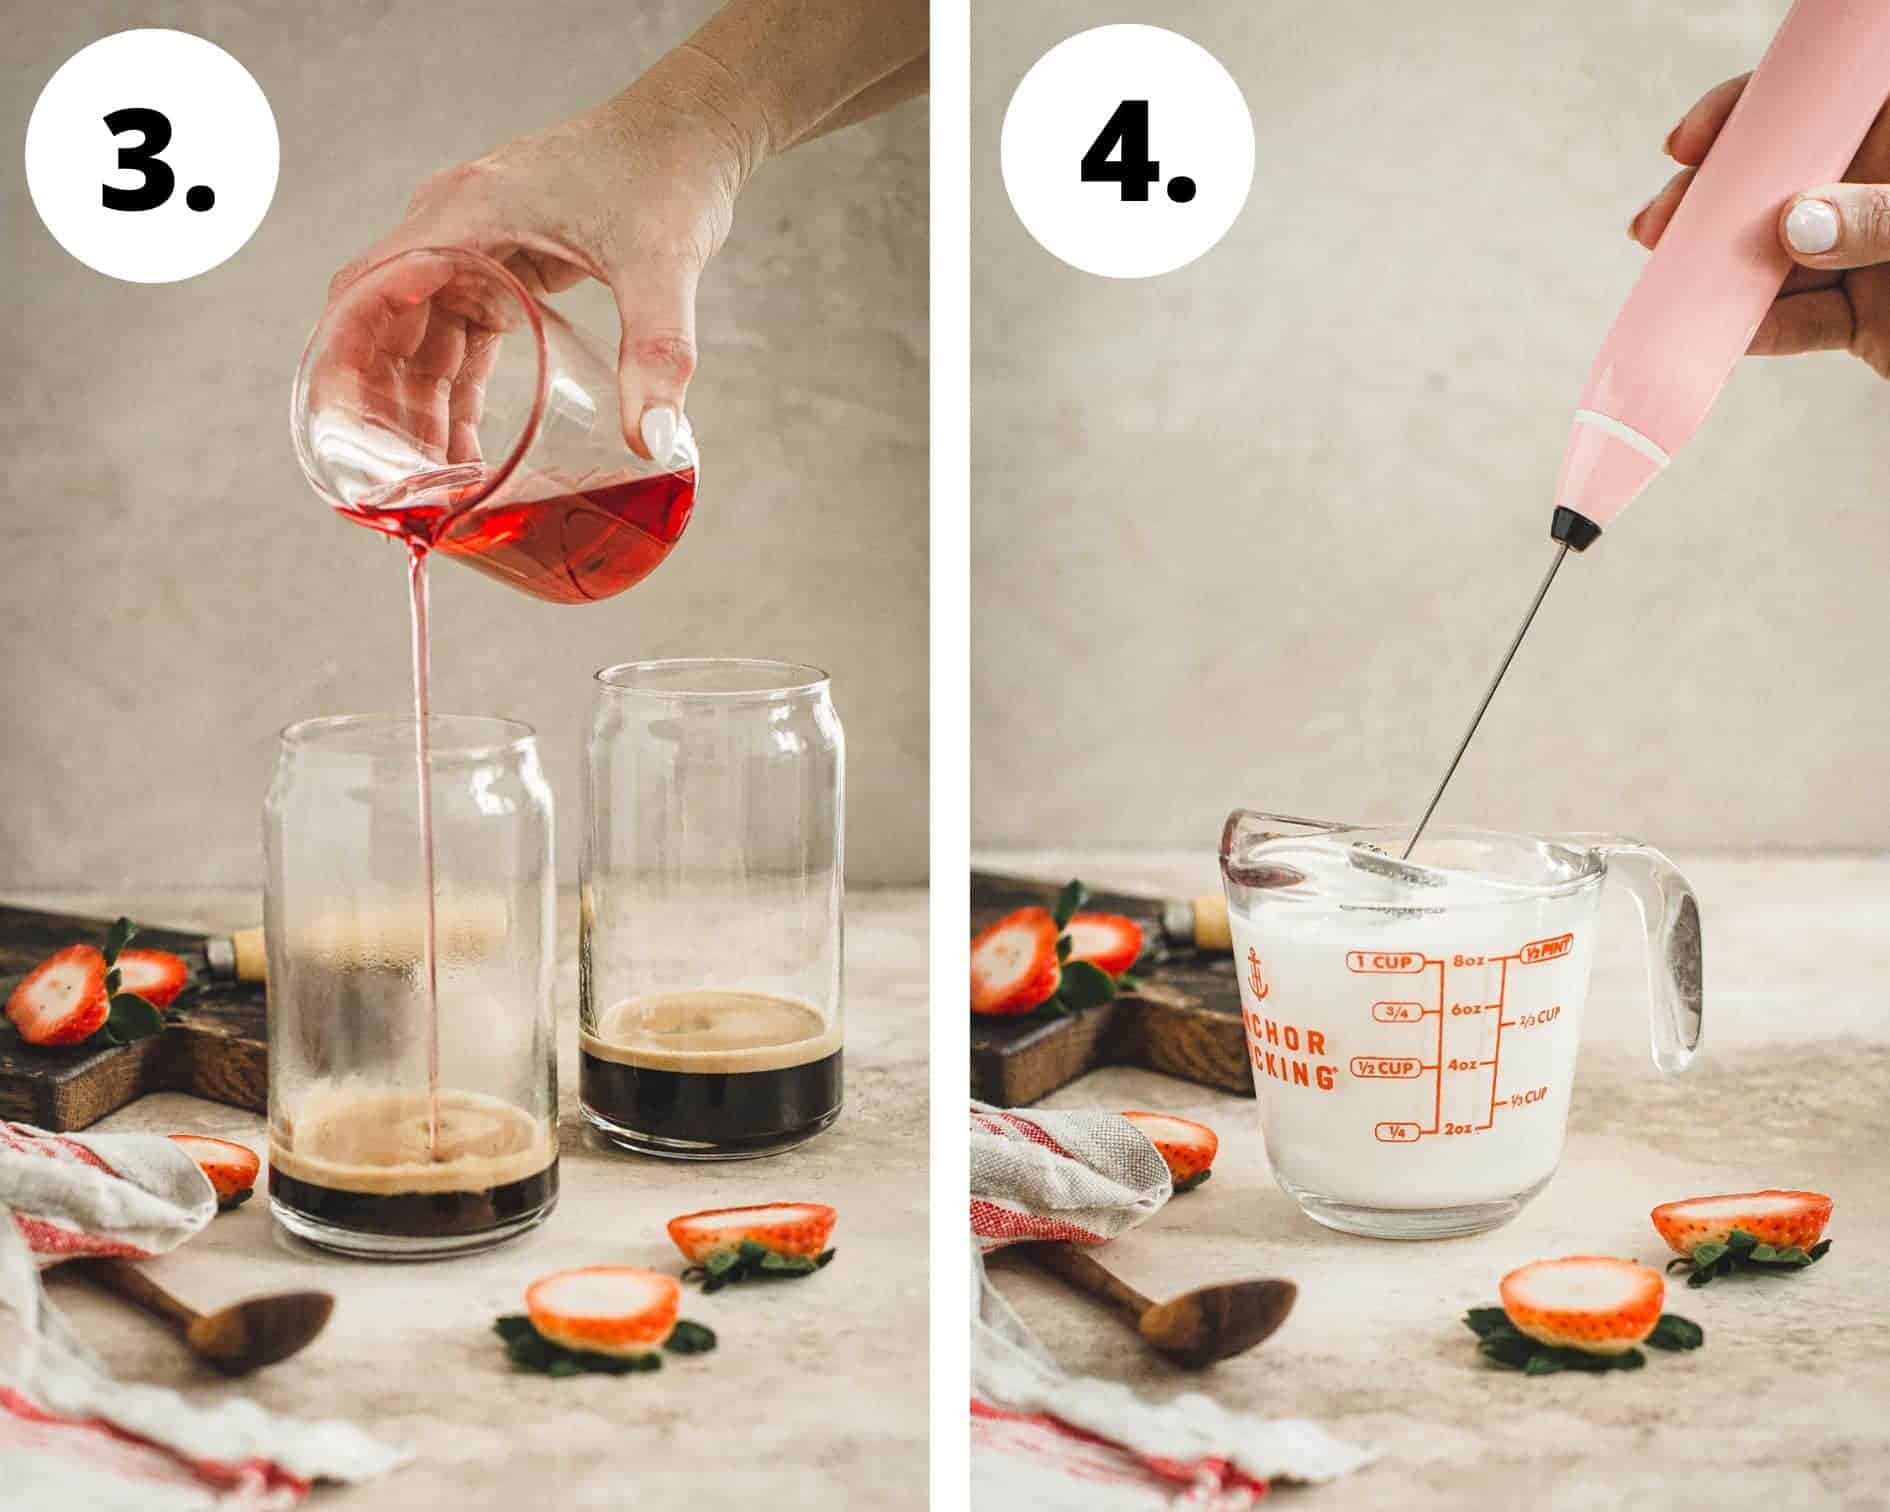 Iced strawberry latte process steps 3 and 4.